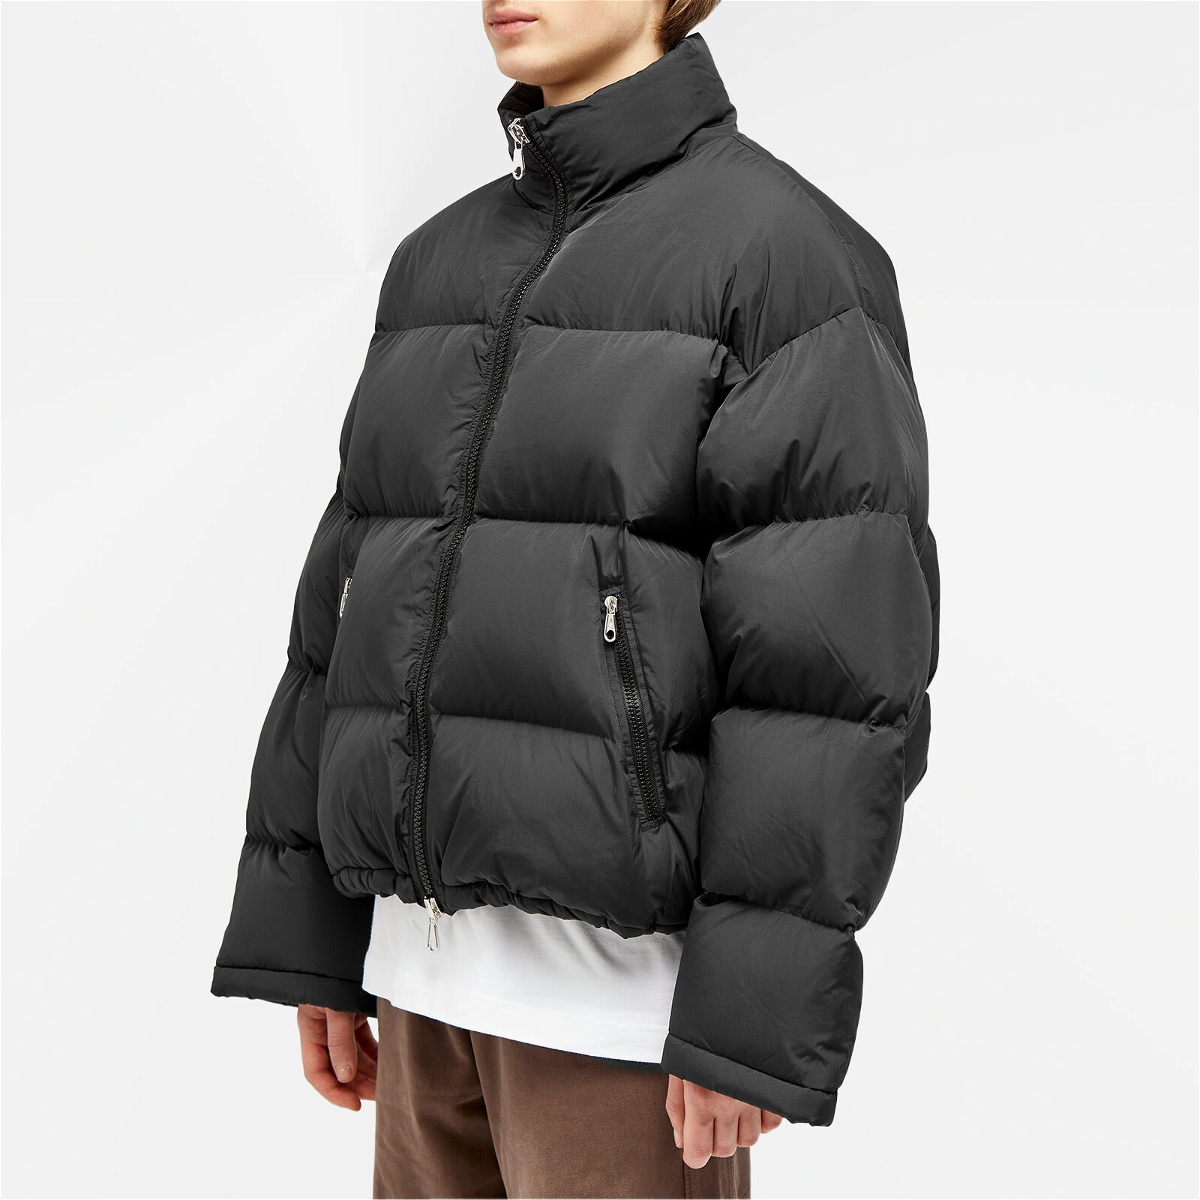 Cole Buxton Men's Insulated Cropped Puffer Jacket in Black Cole Buxton